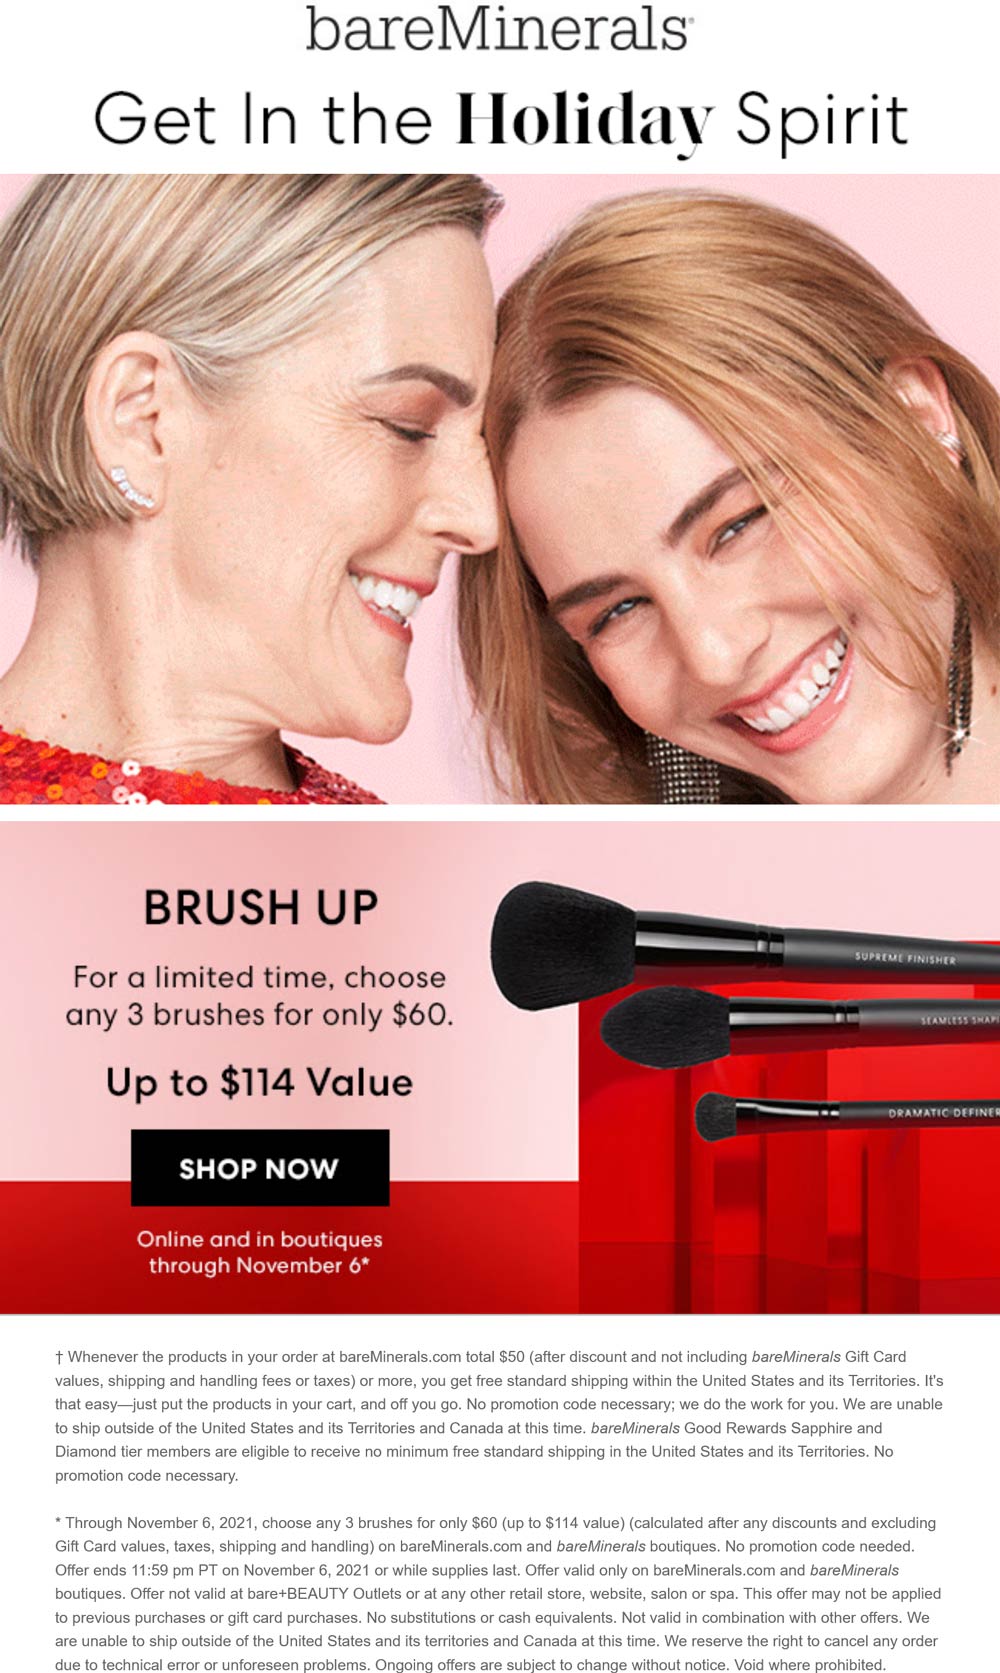 bareMinerals stores Coupon  Any 3 brushes for $60 at bareMinerals, ditto online #bareminerals 